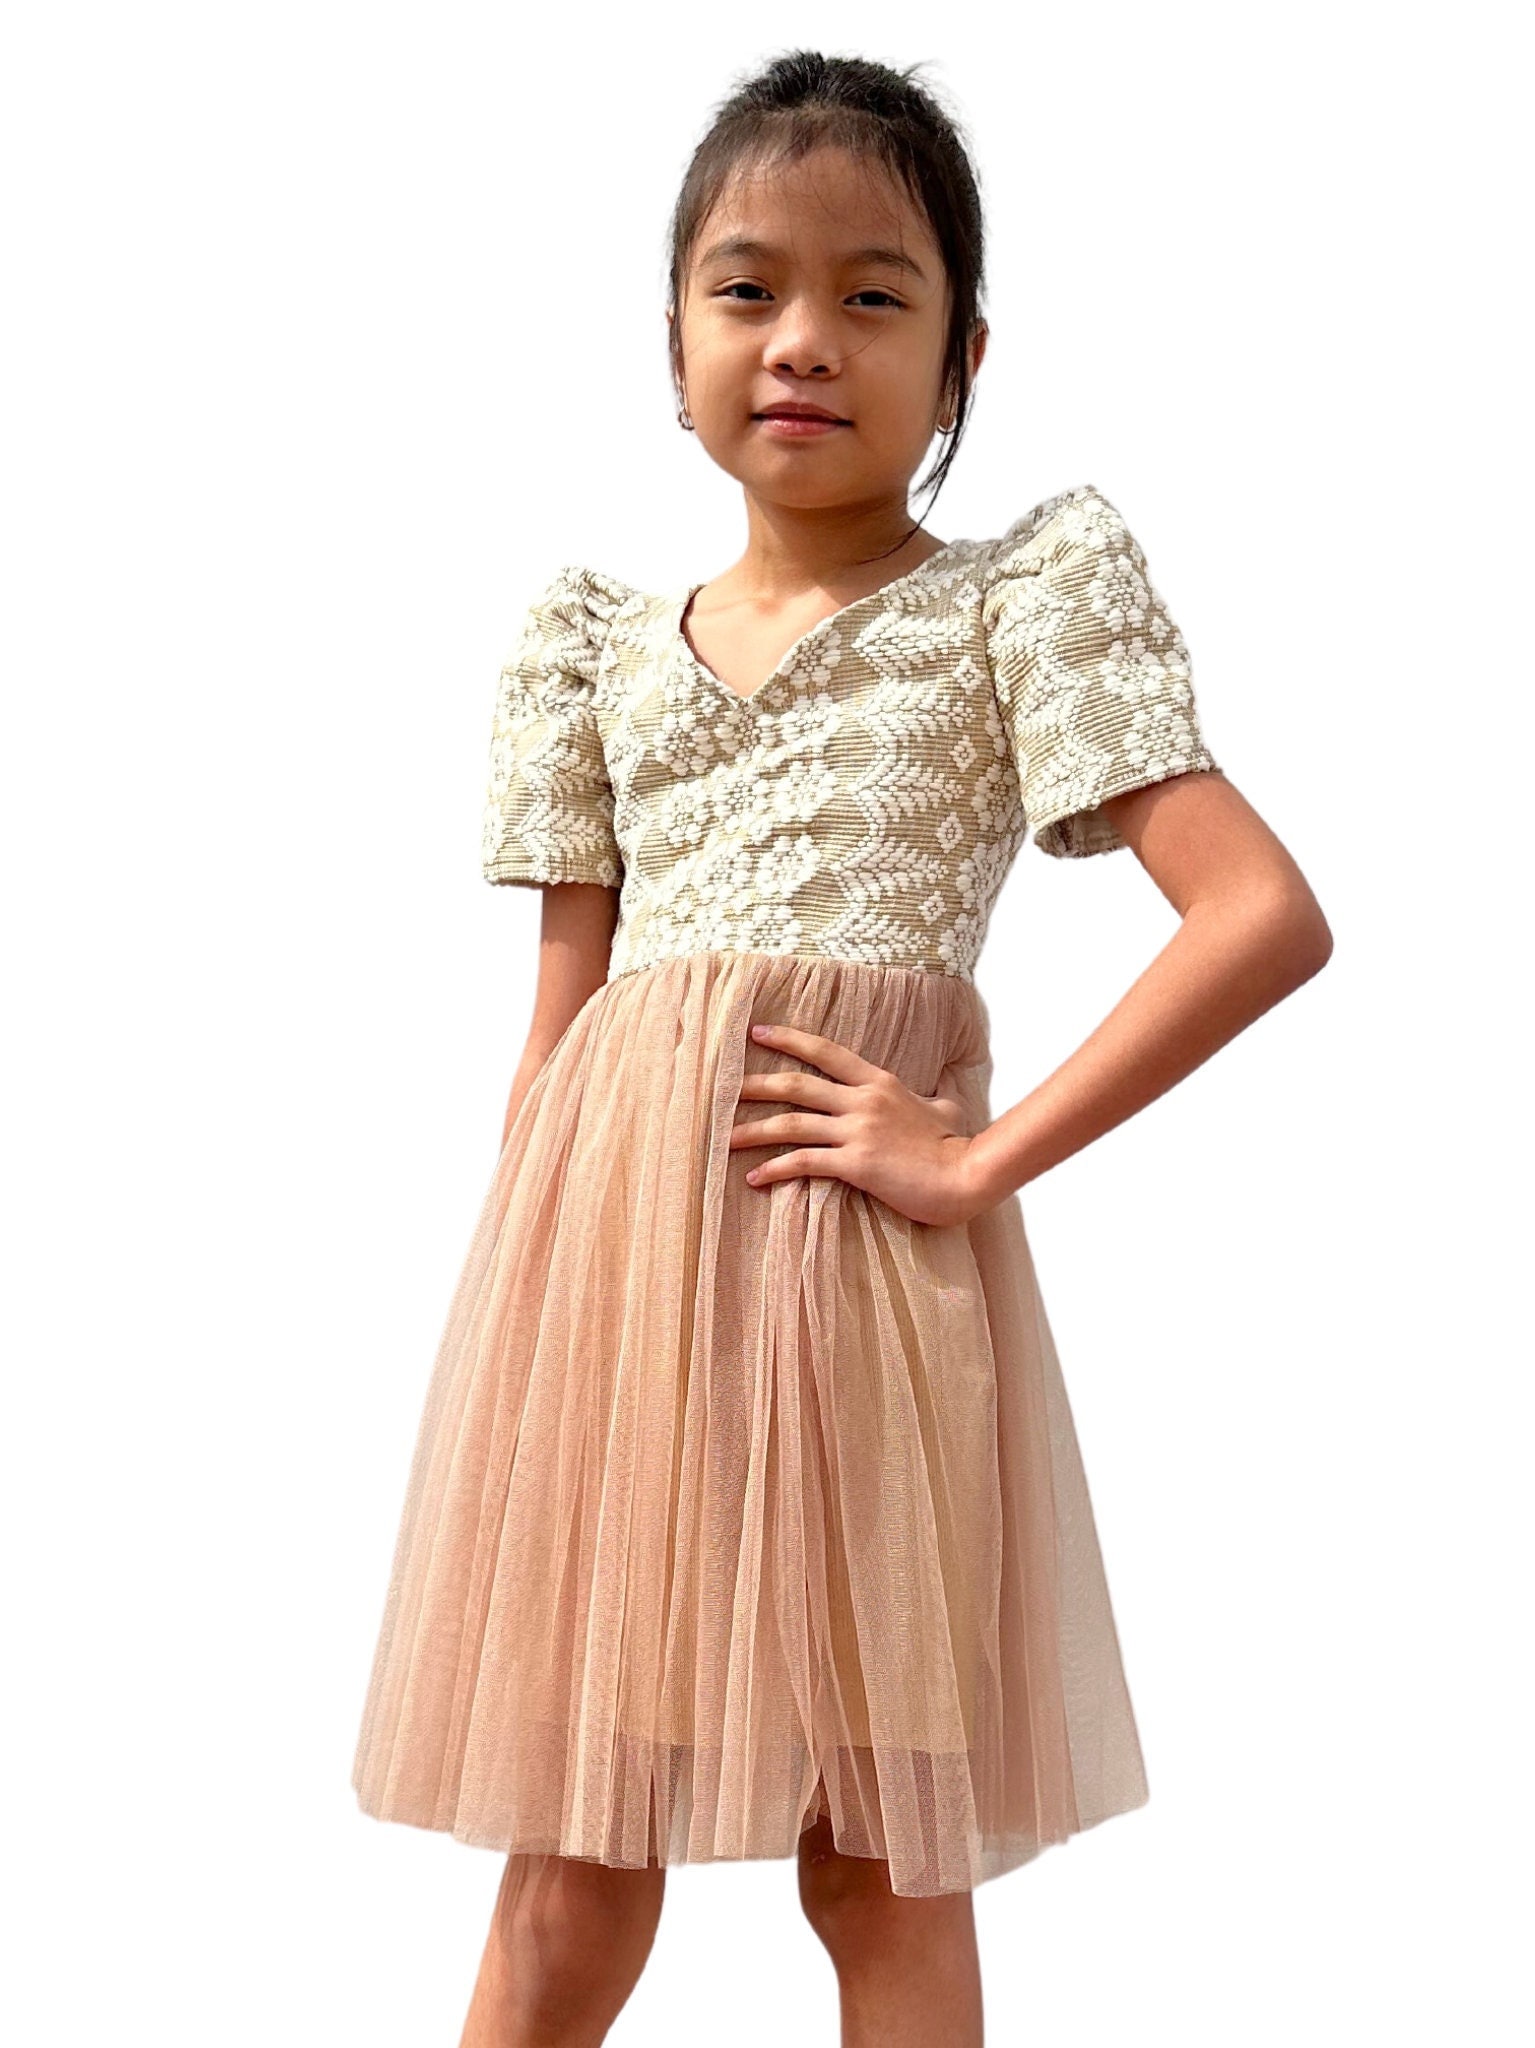 A young Filipina child sporting dress made of recycled col…